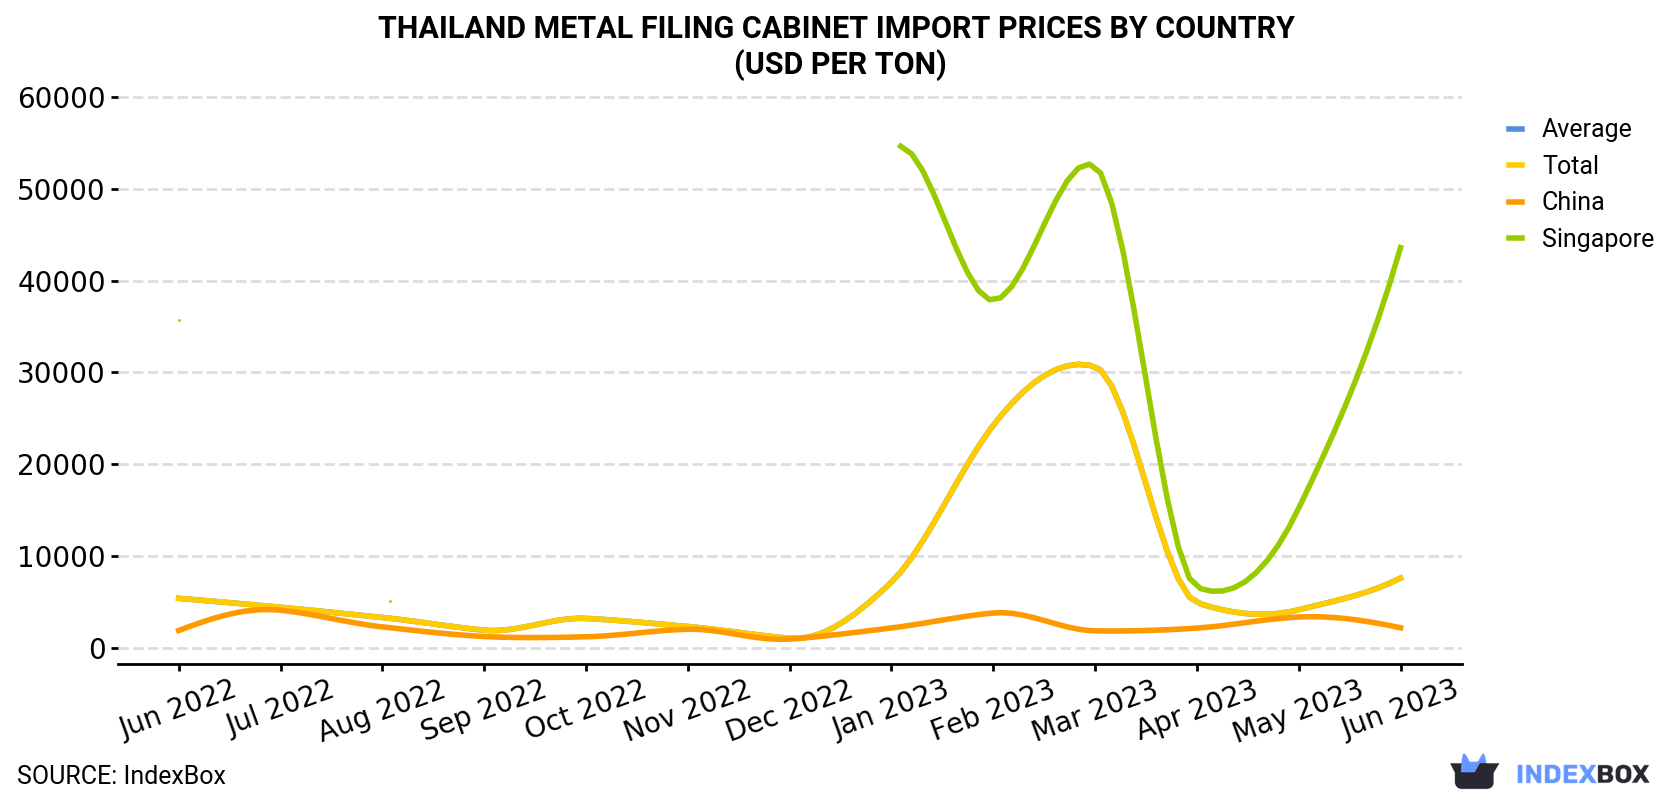 Thailand Metal Filing Cabinet Import Prices By Country (USD Per Ton)